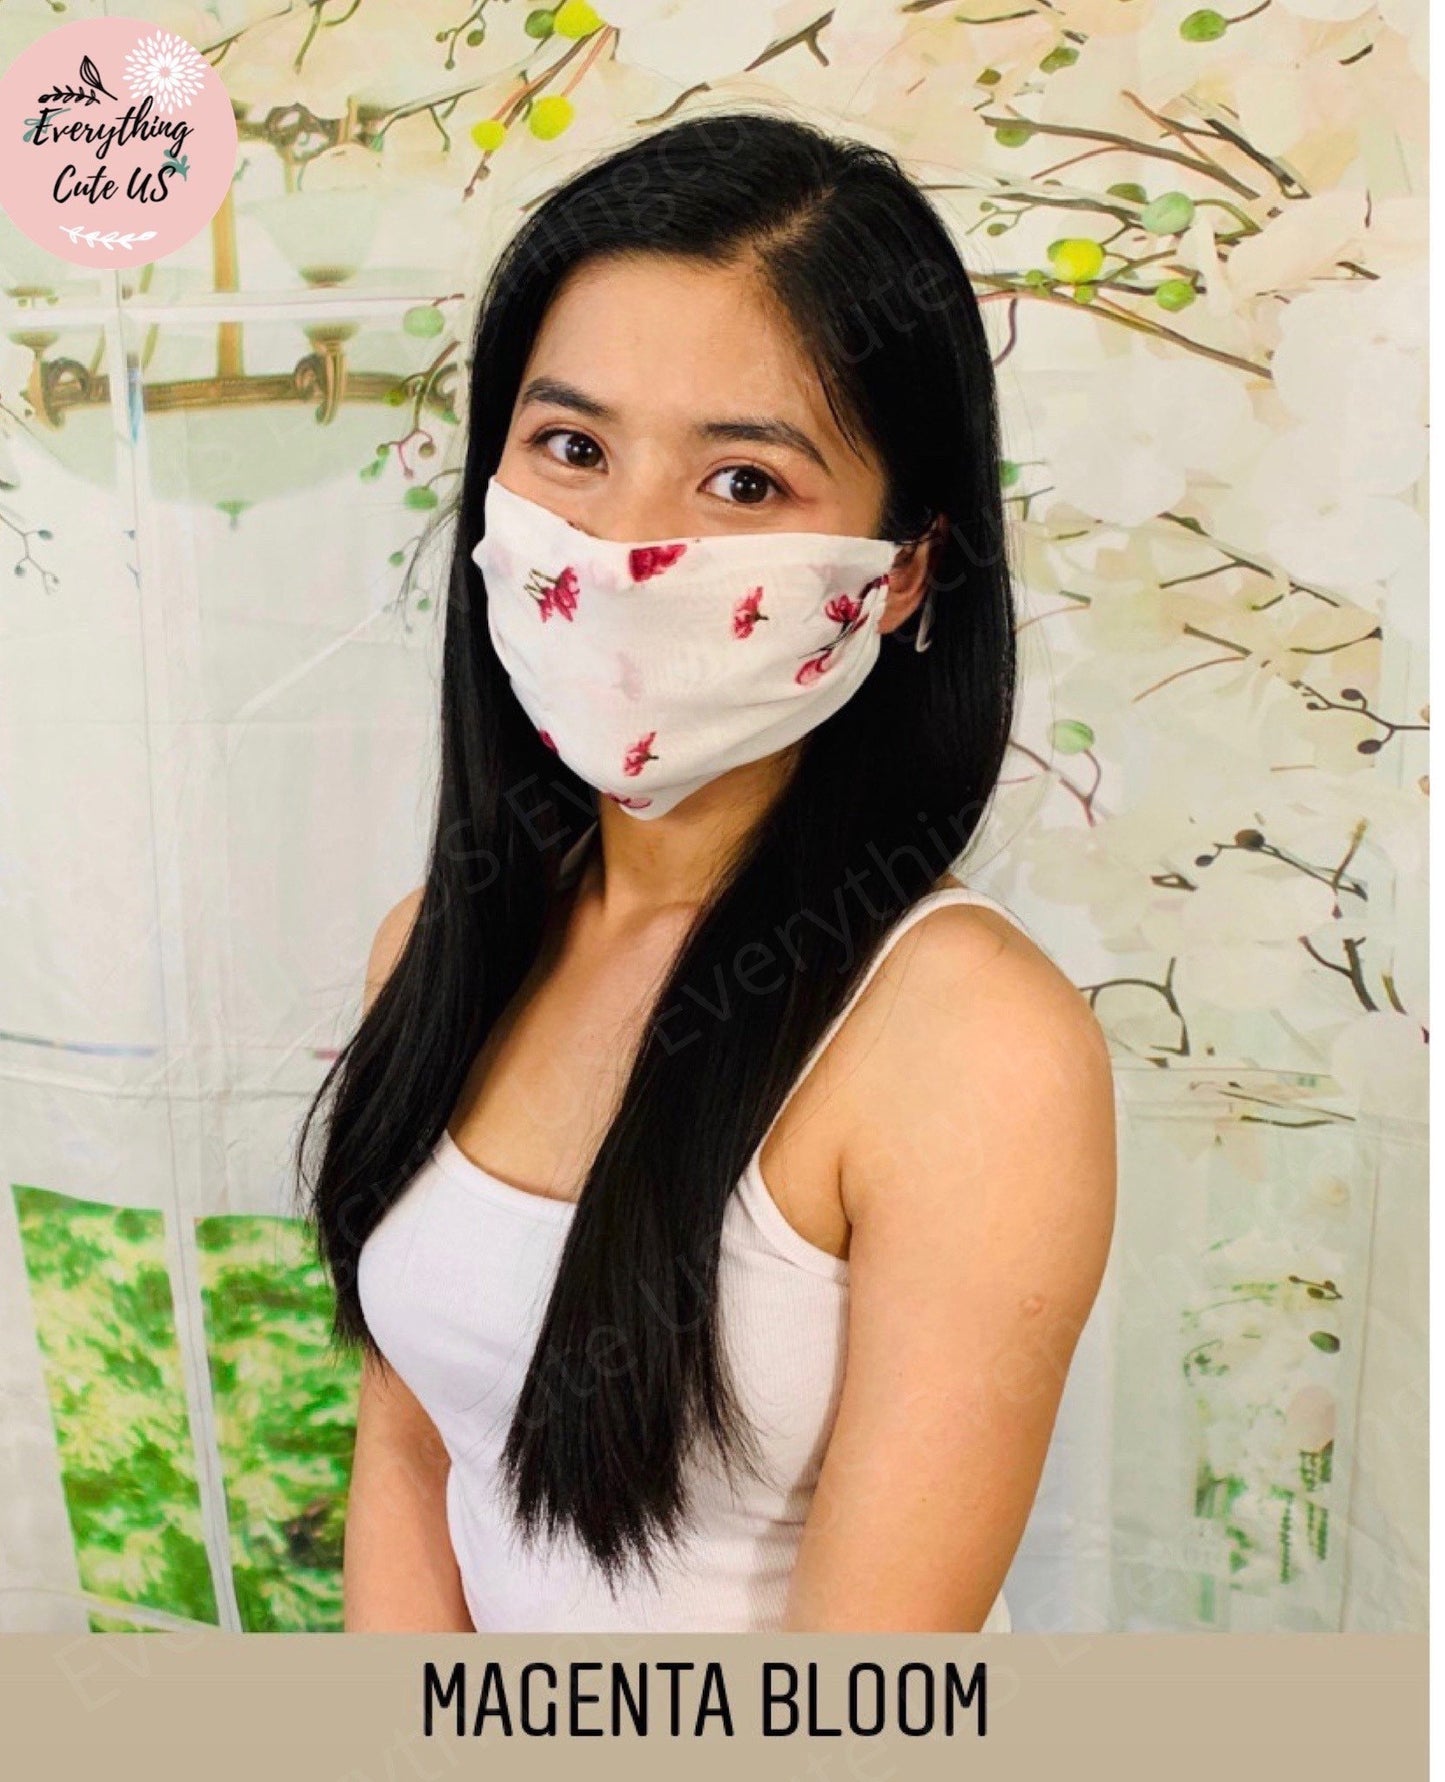 Lightweight Face Mask, Thin Breathable Chiffon Face Mask With Ear Loops, Cute Floral Summer Face Cover